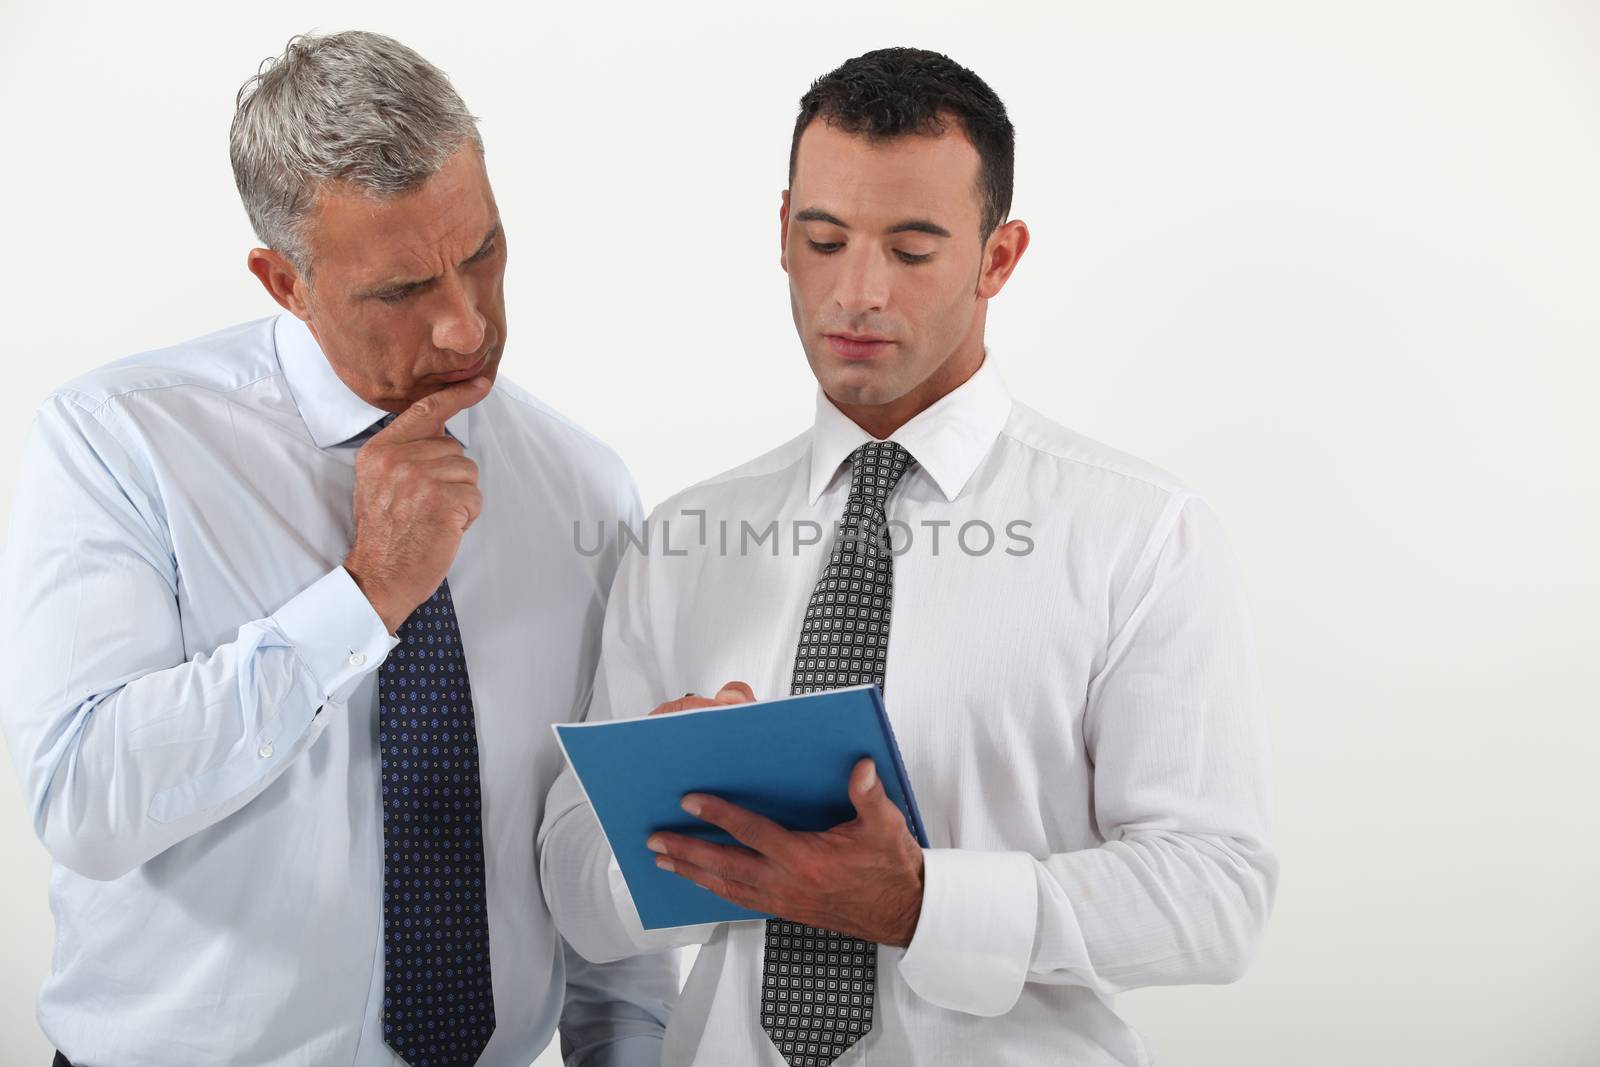 Two employees going over contract